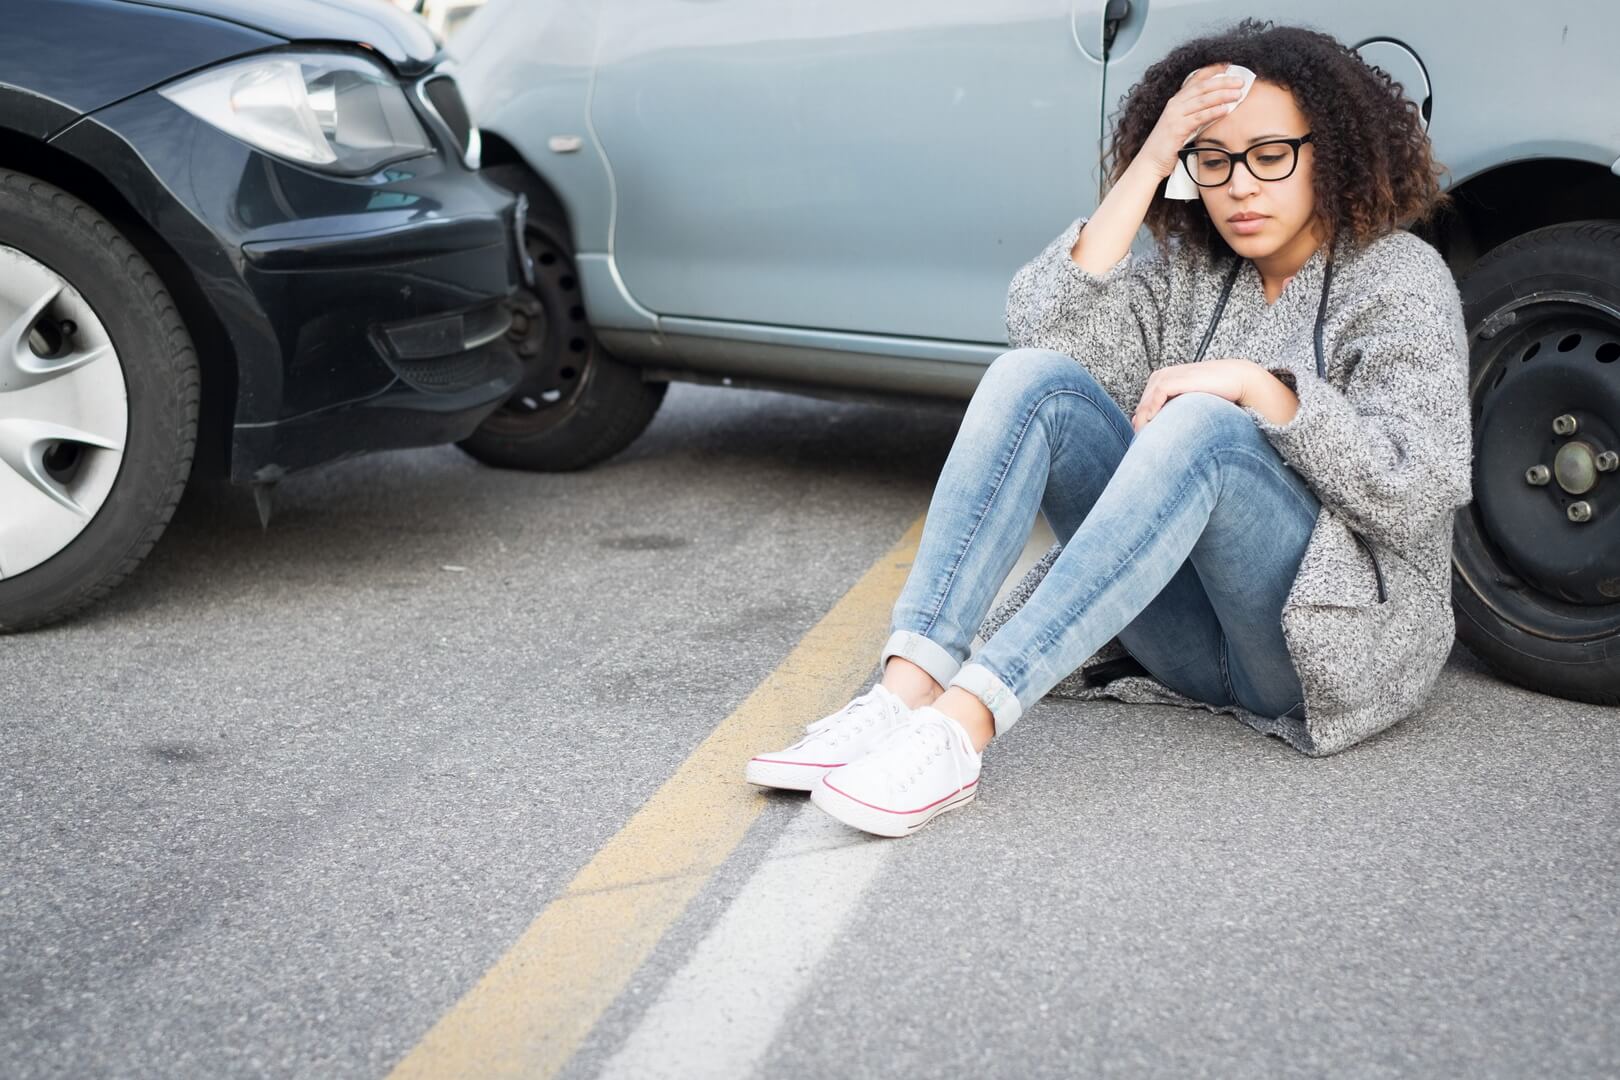 5 Common Vehicle Accident Injuries and Treatment Options